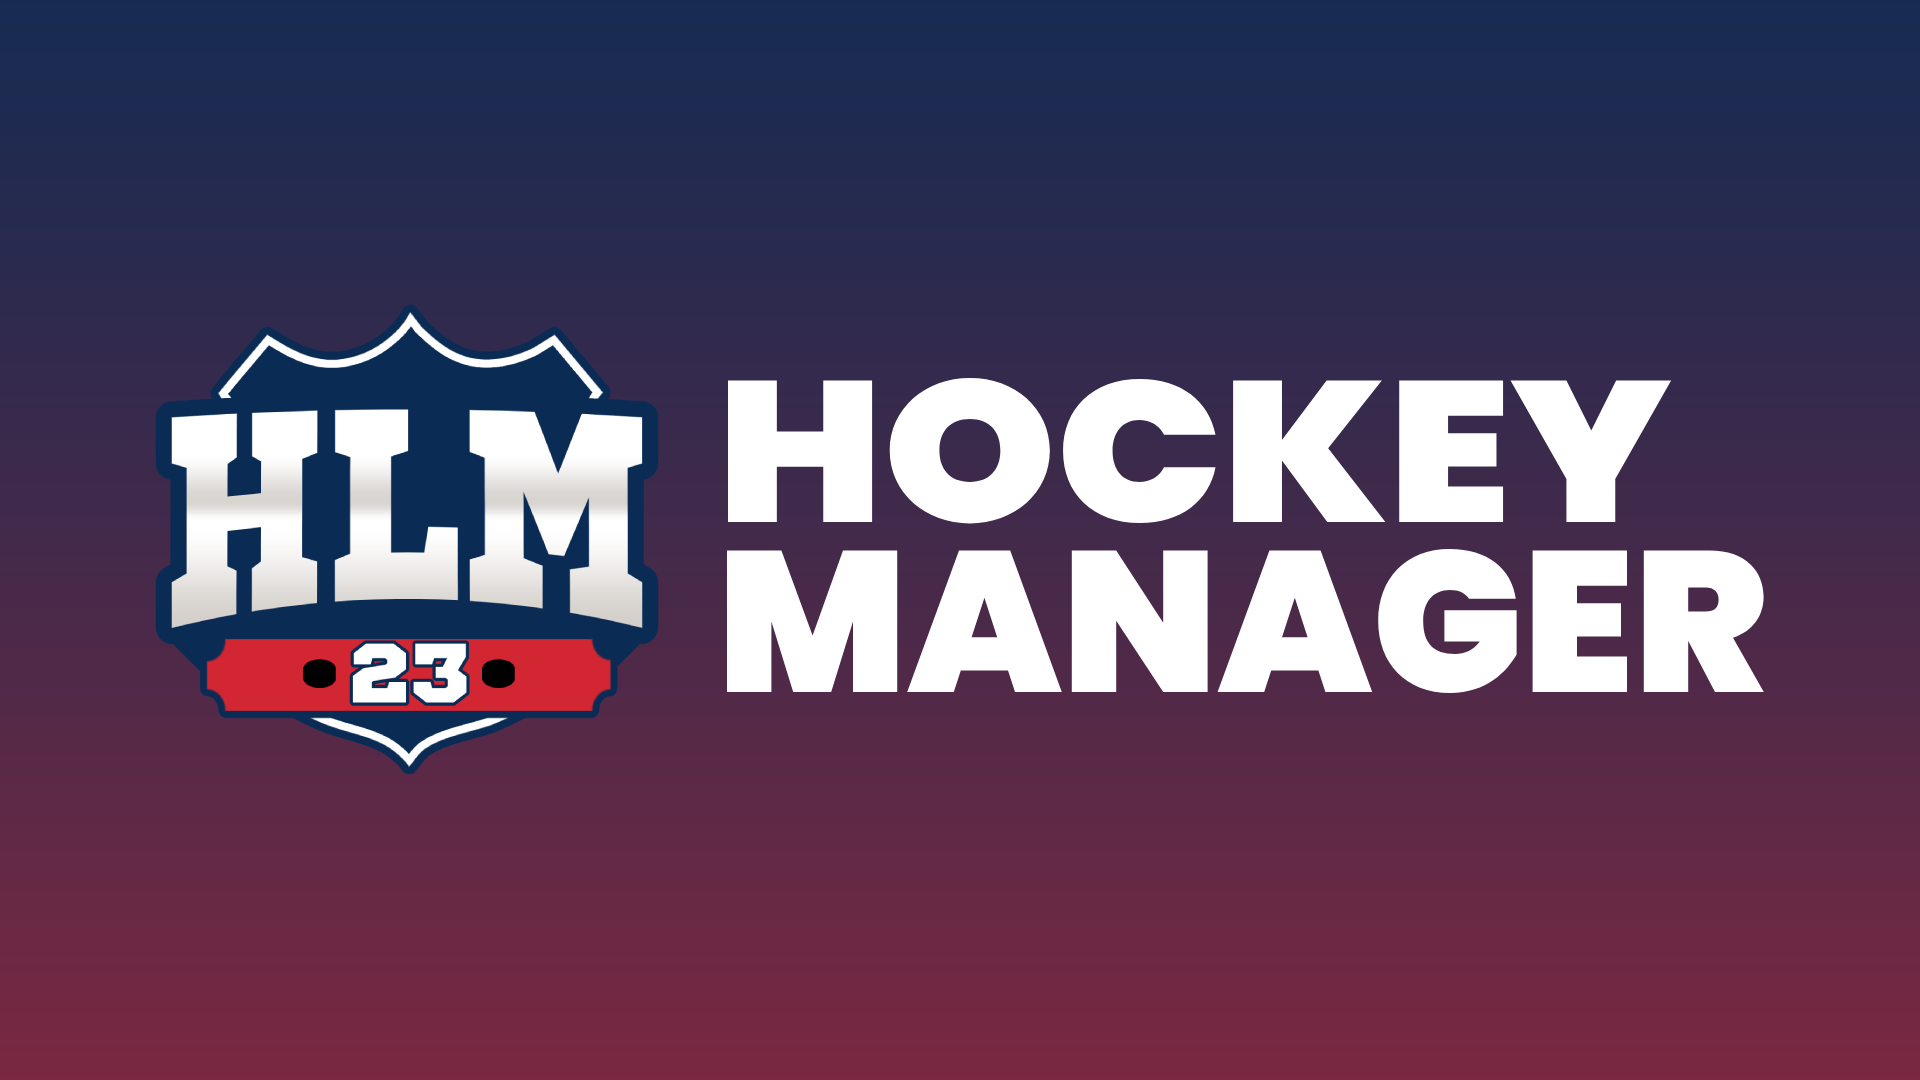 Download Football Manager 2022 Demo Free and Play on PC